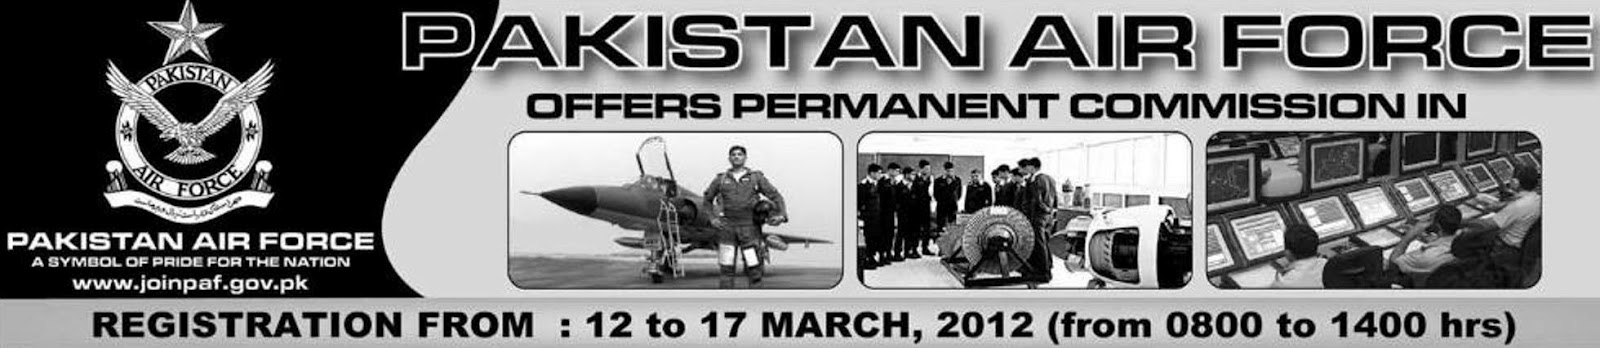 Pakistan+Air+Force+Offers+Commission+in+108+NON+GD+COURSE+(Job+Opportunities+in+PAF+Pakistan+Air+Force+Kamra+Avionics+&+Radar+Factory+(JF-17+Thunder+Project)+join+(1).jpg